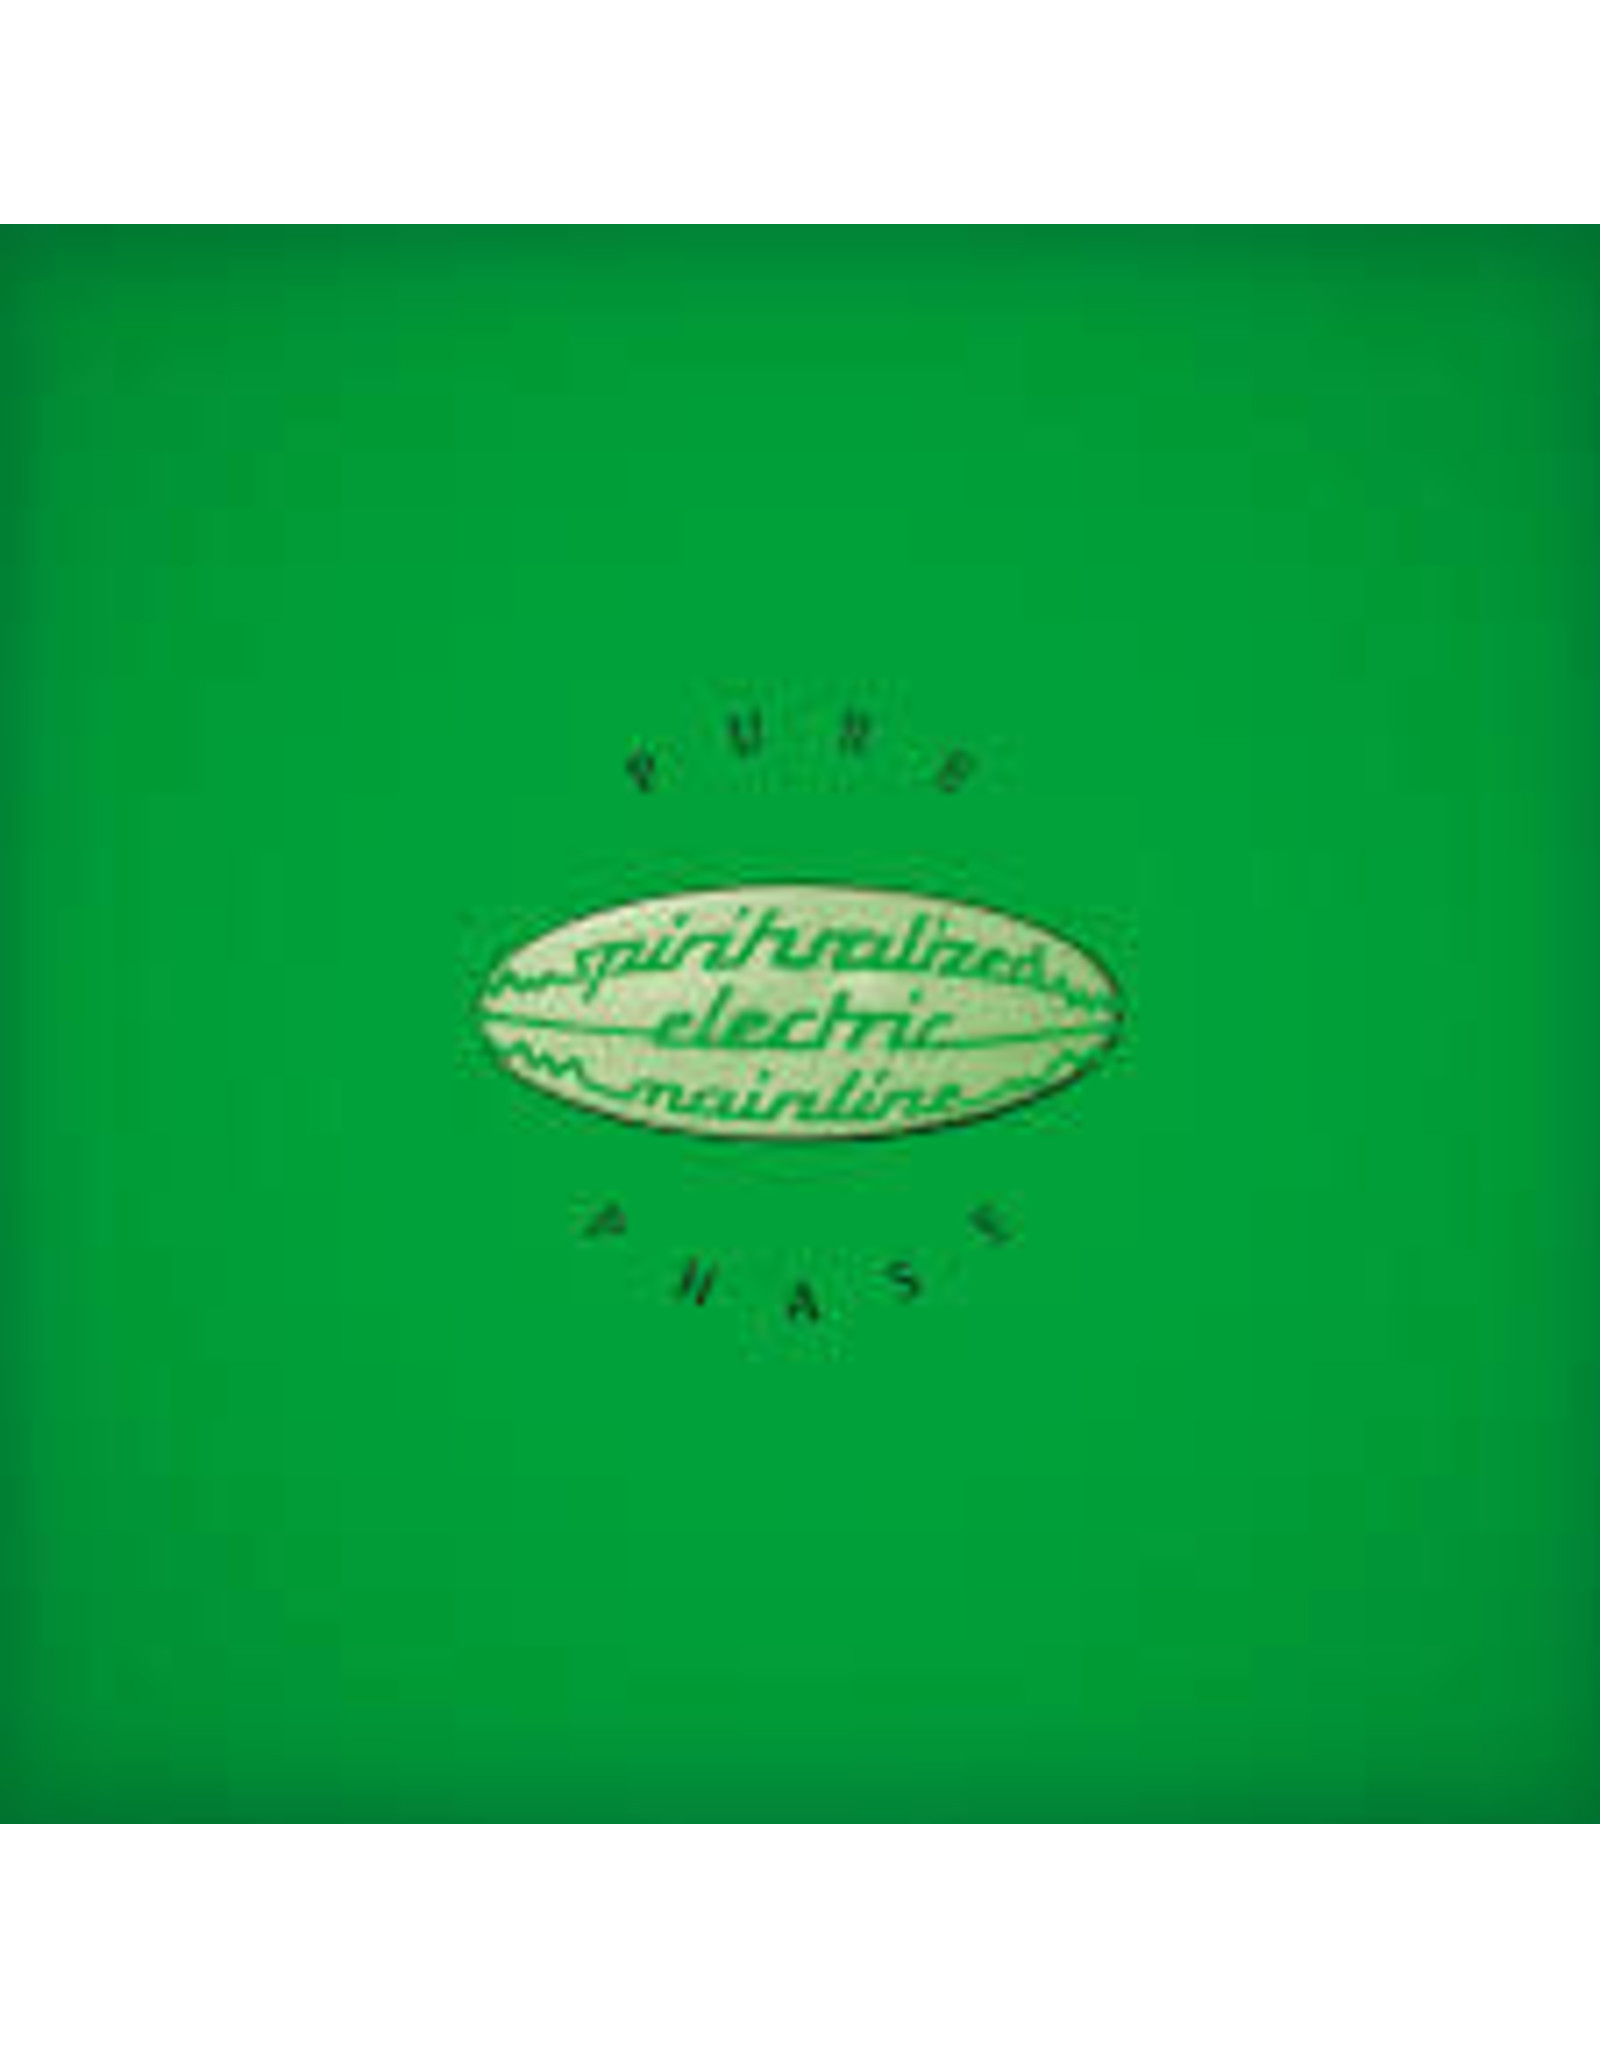 Spiritualized - Pure Phase LP